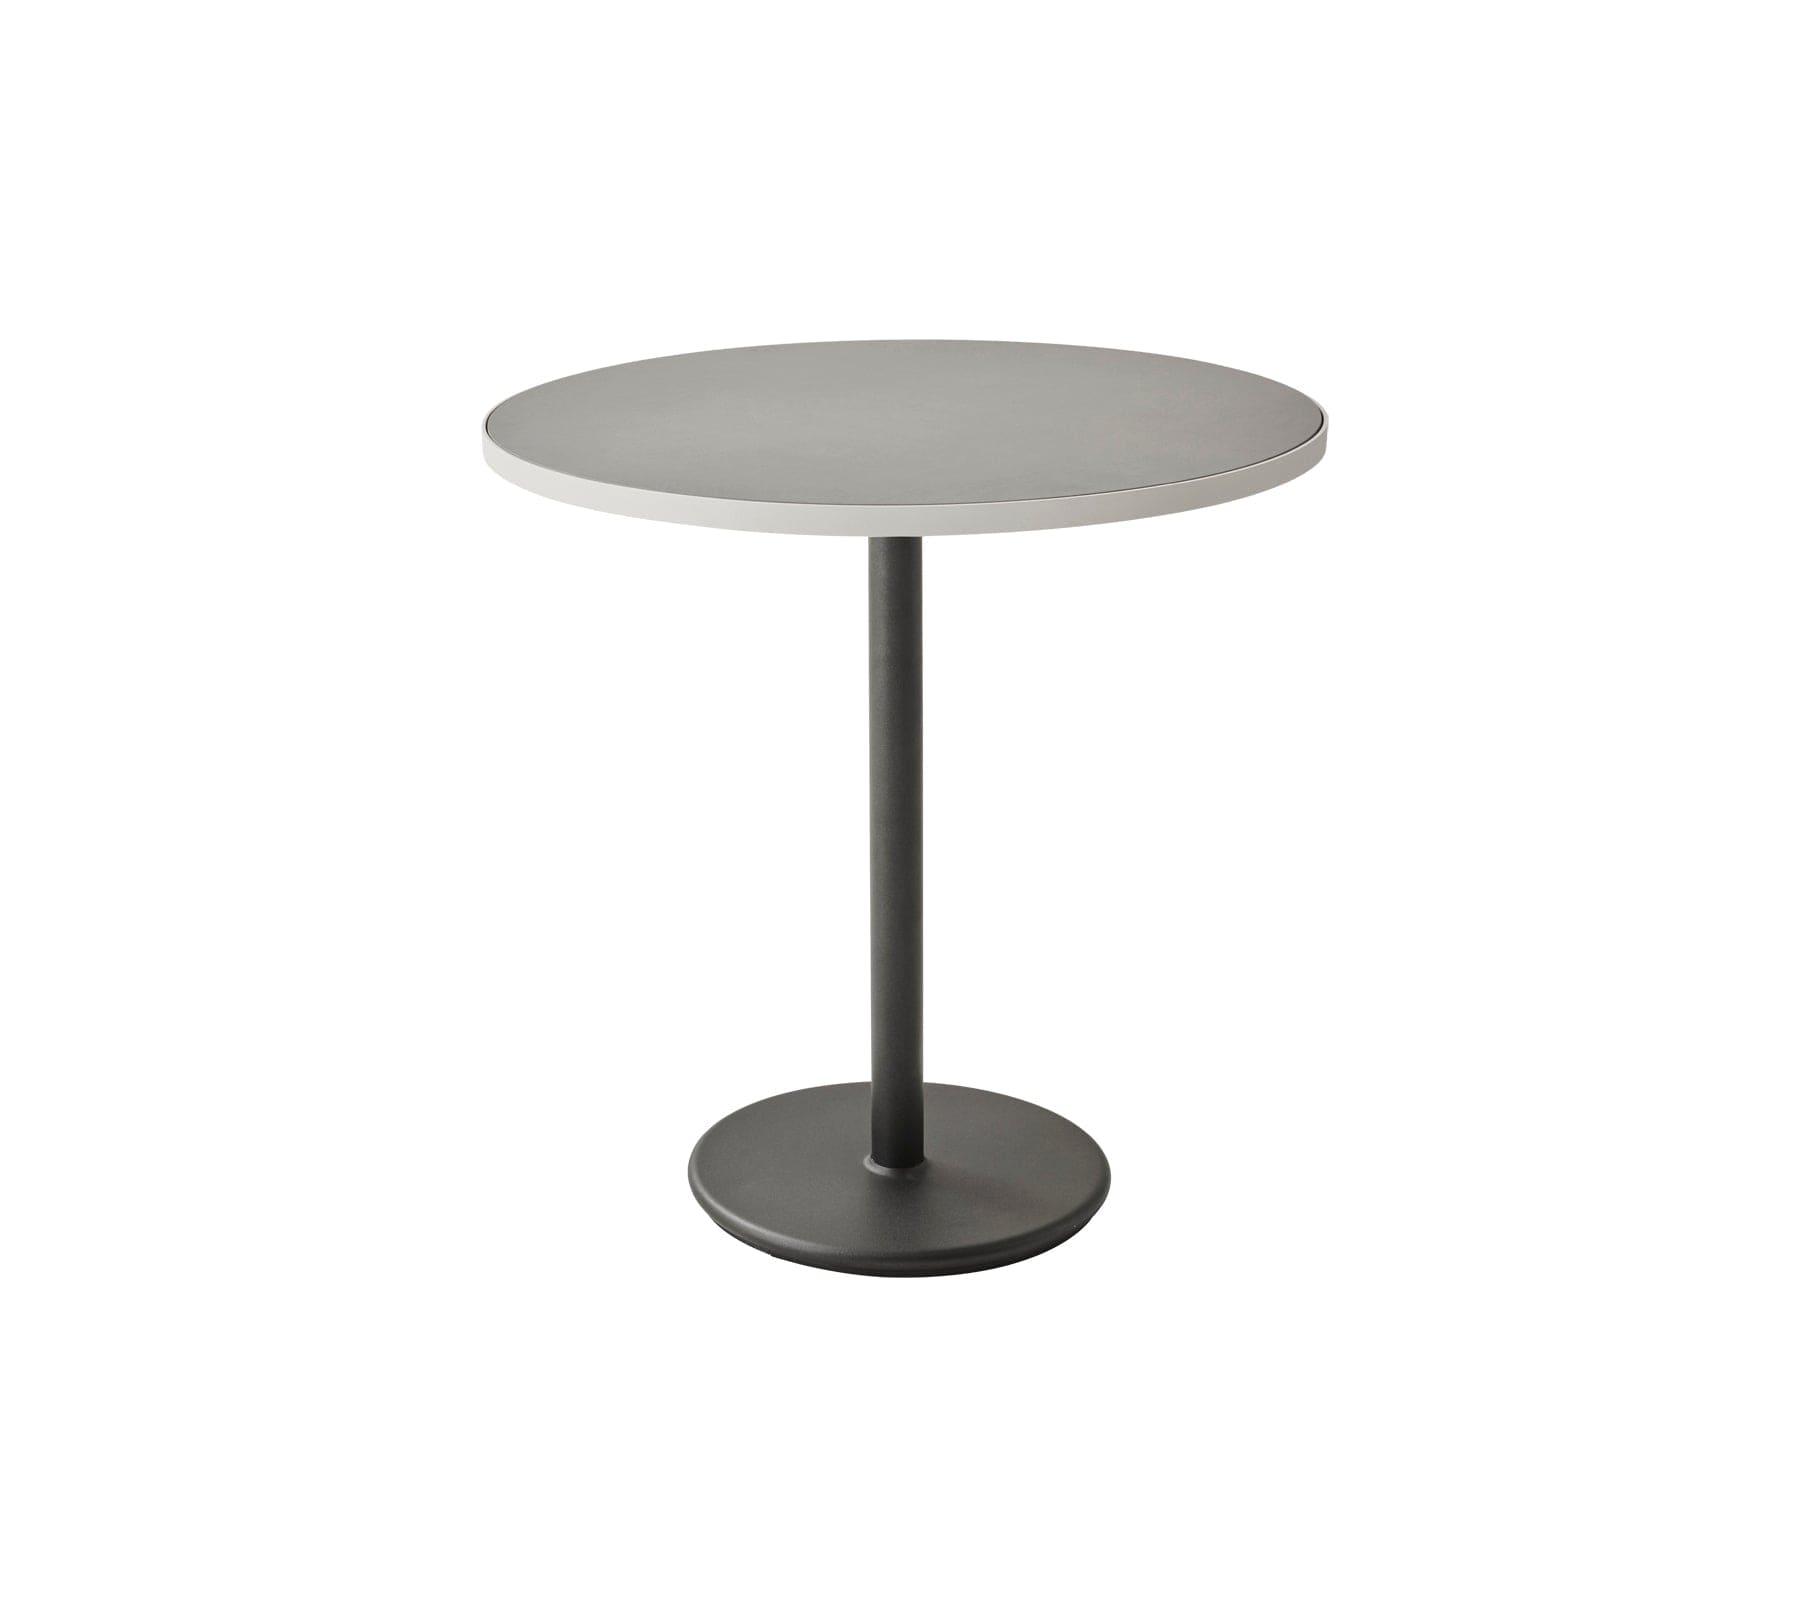 Boxhill's Go Outdoor Round Cafe Table White Aluminum And Light Grey Ceramic Top